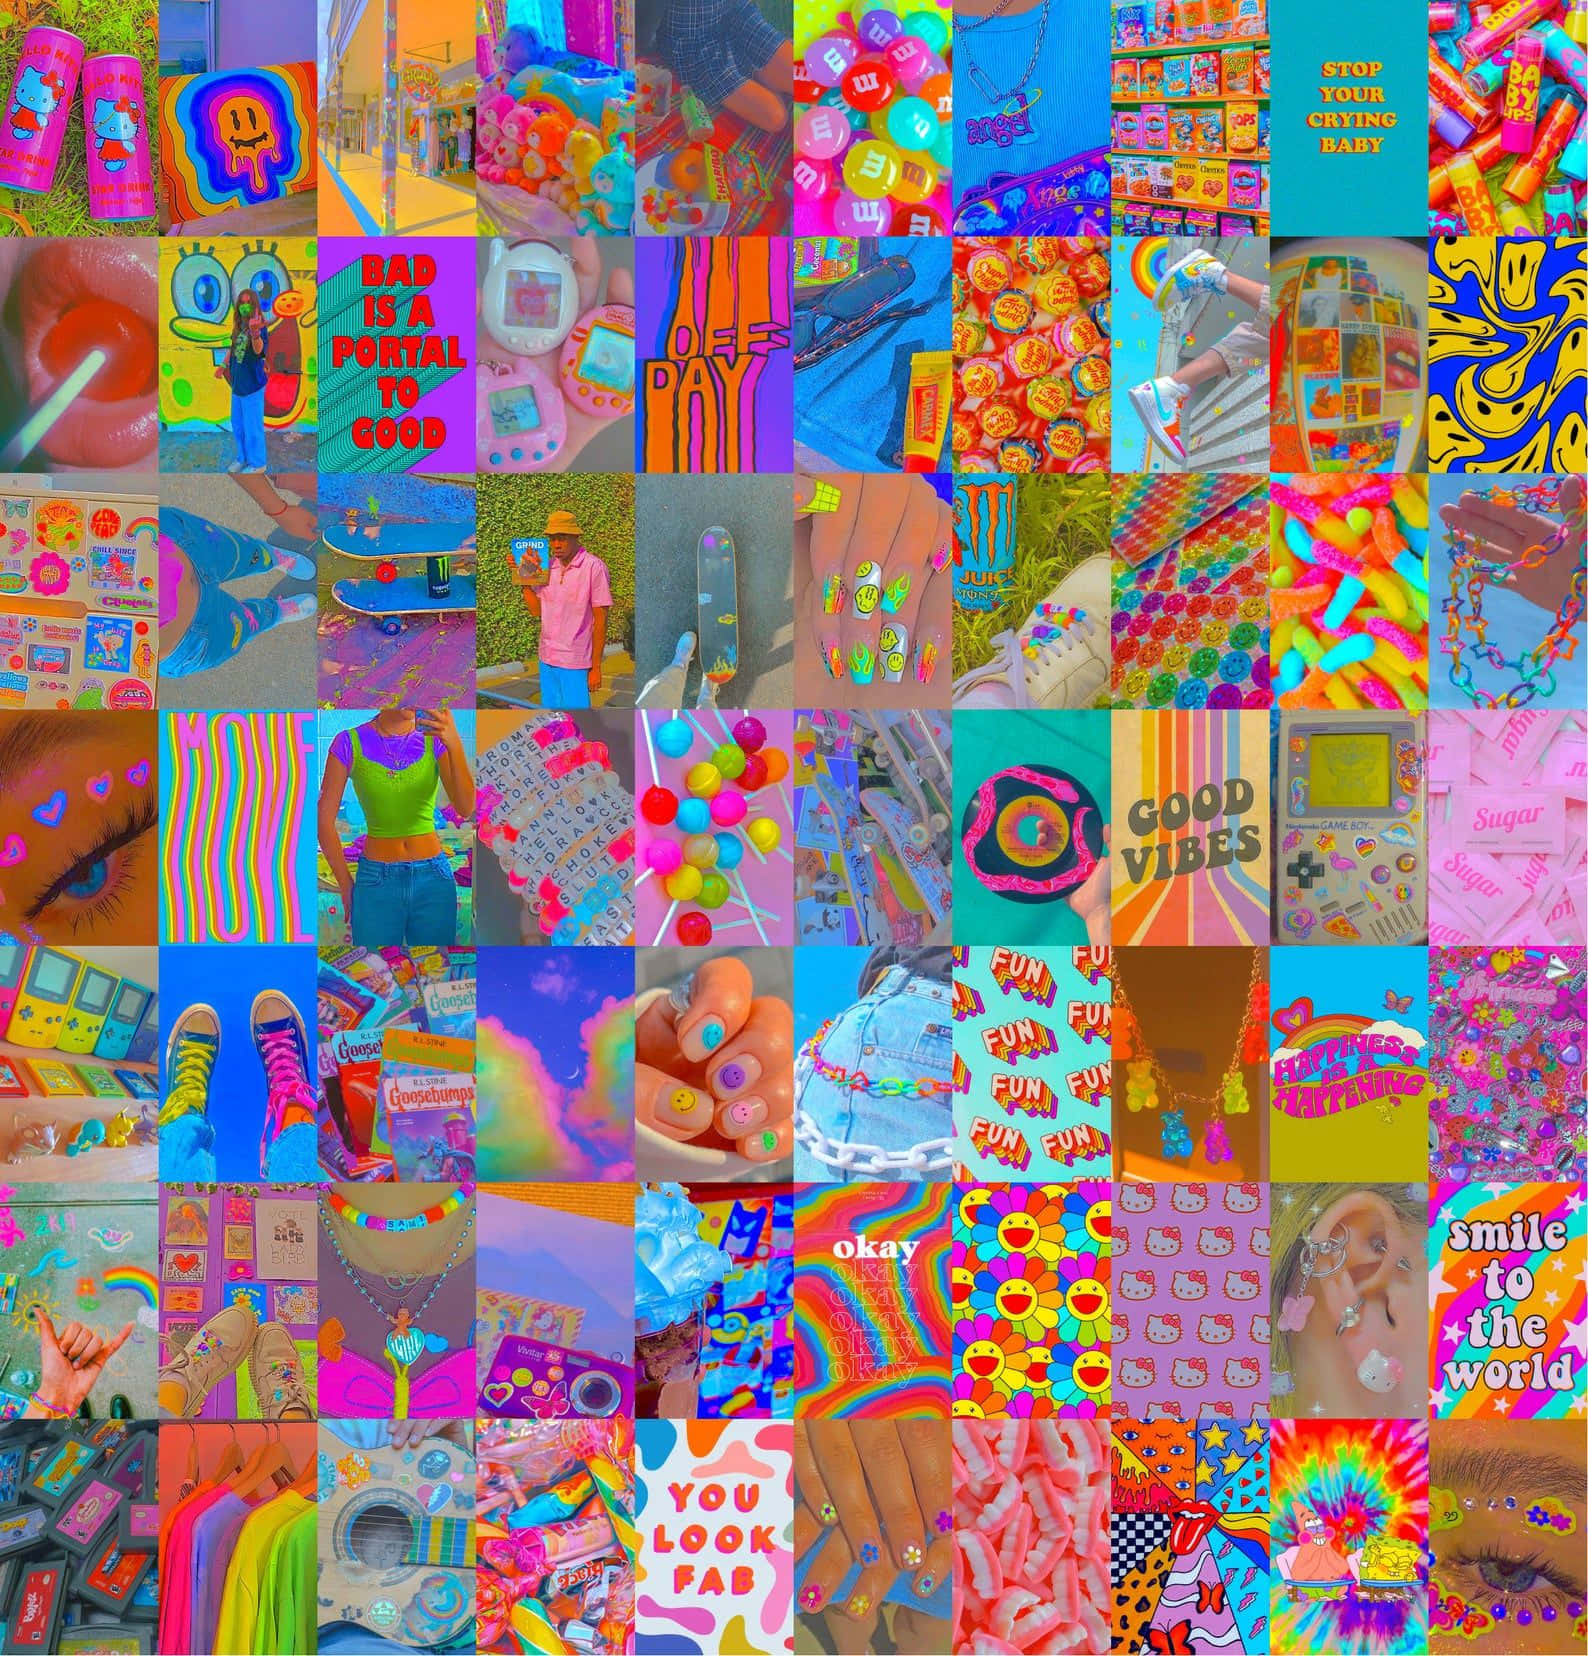 A Collage Of Colorful Pictures And Objects